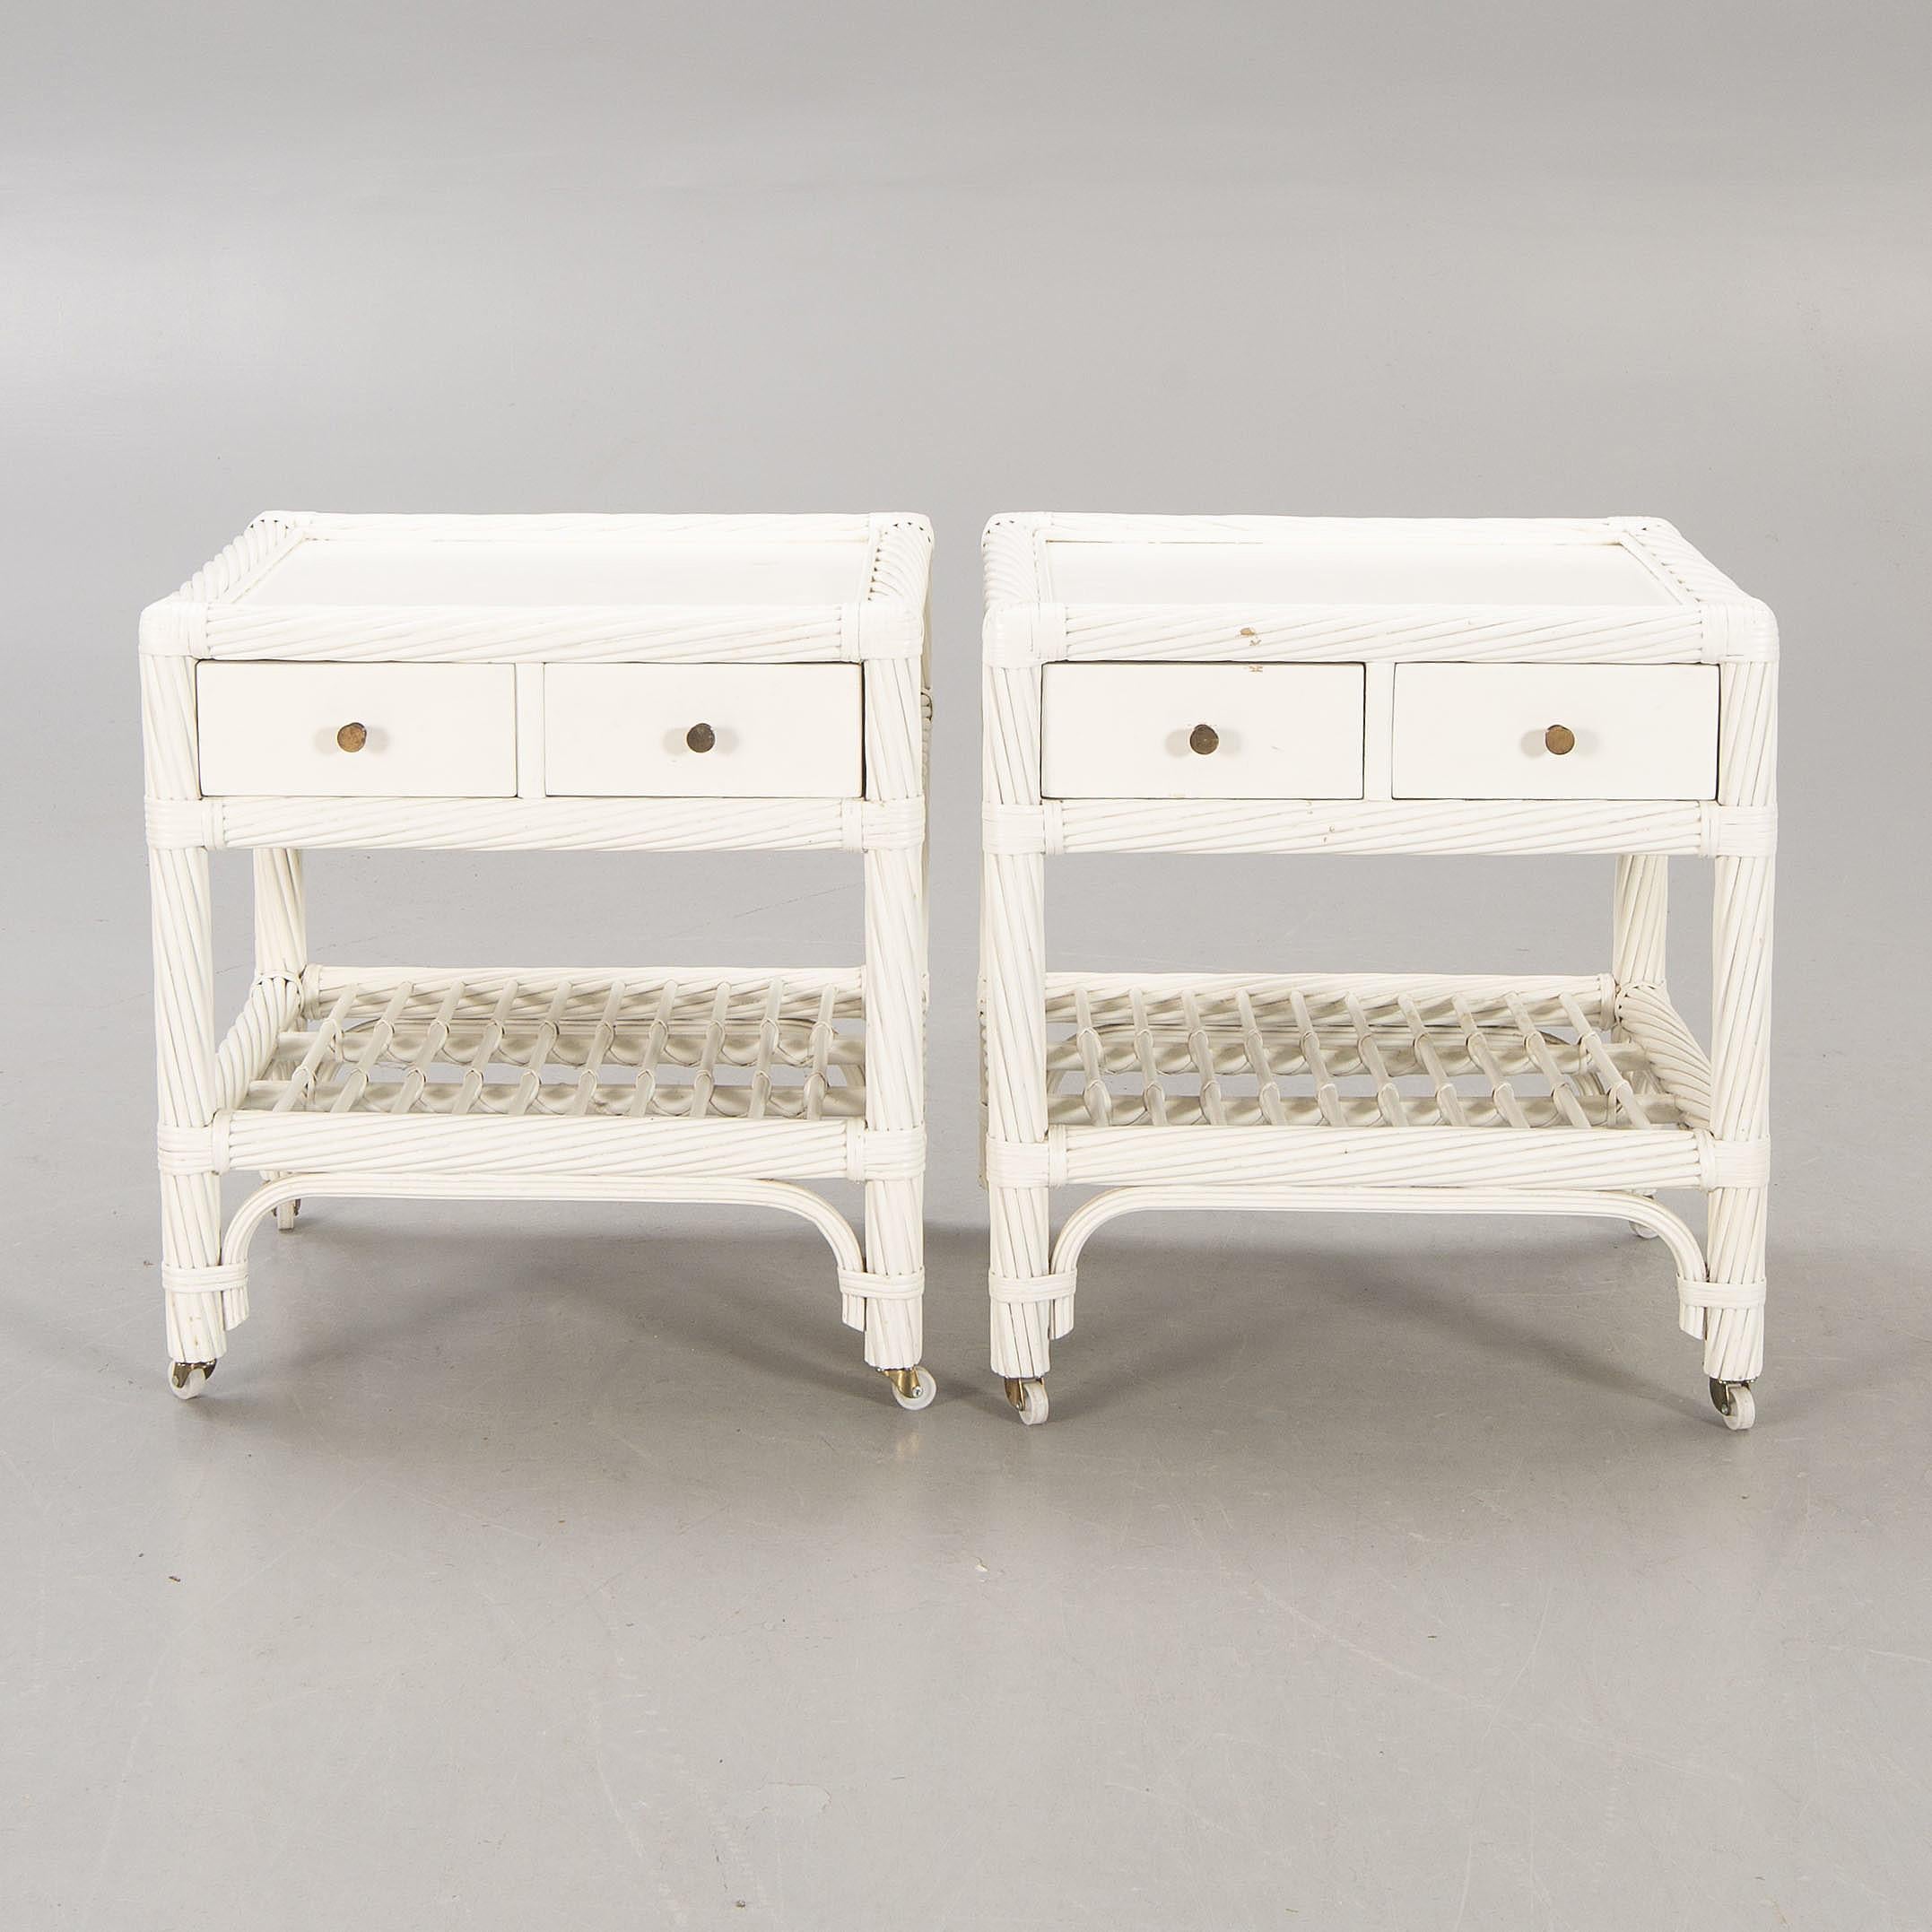 Pair of Nightstand White Lacquer Bamboo and Wood by DUX, Sweden, 1960 In Good Condition For Sale In Paris, FR